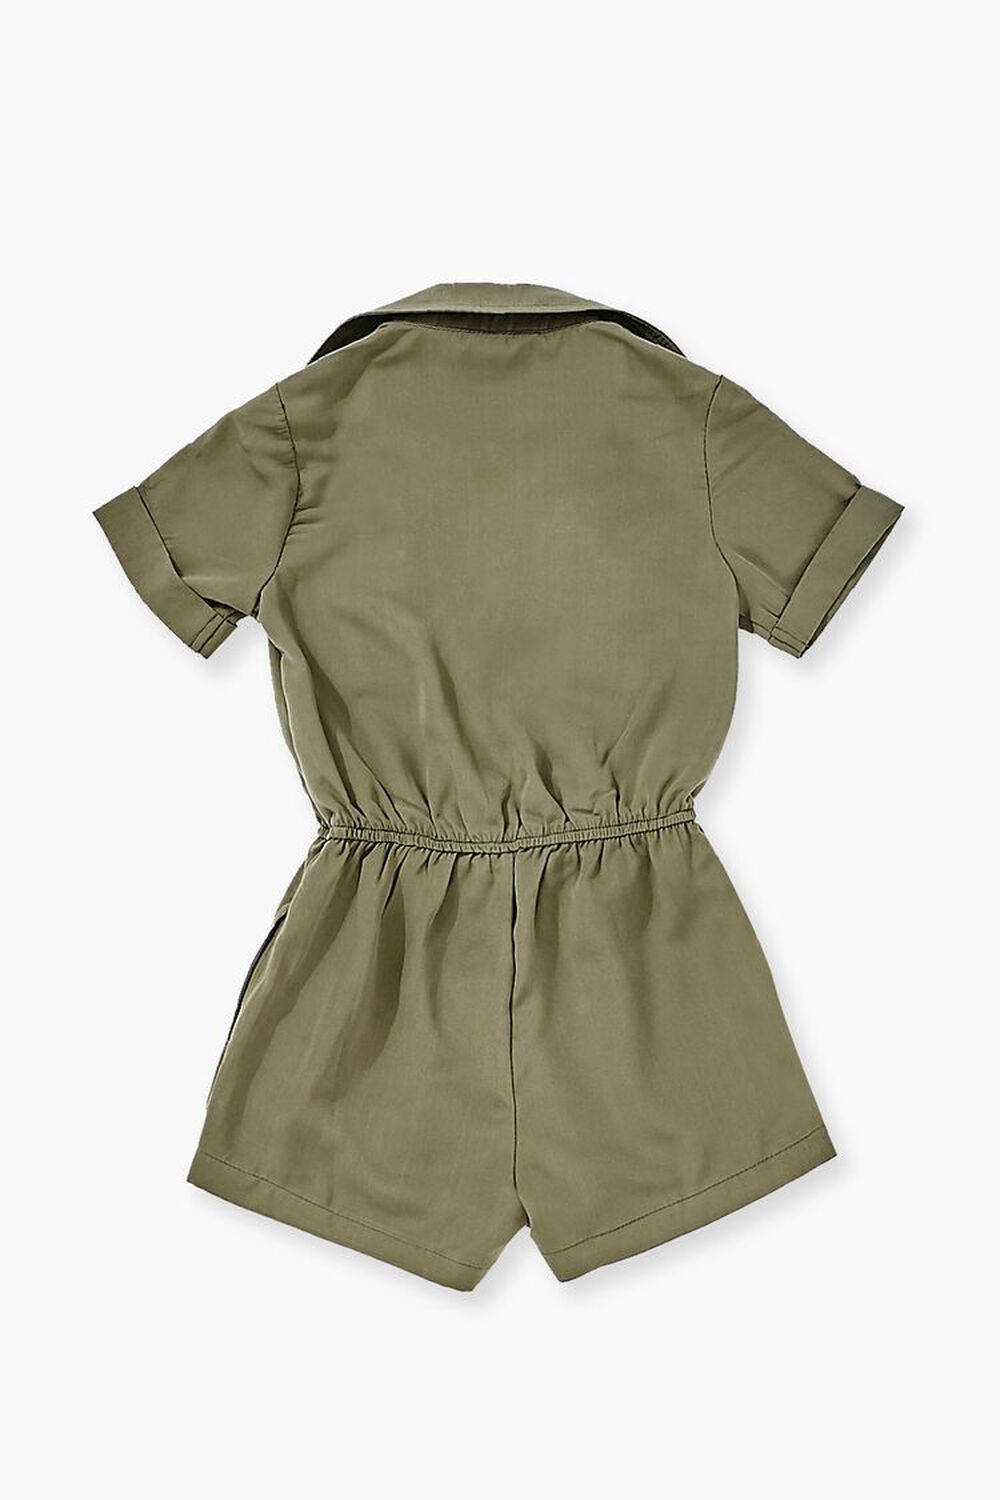 Buttoned Collared Romper, image 2